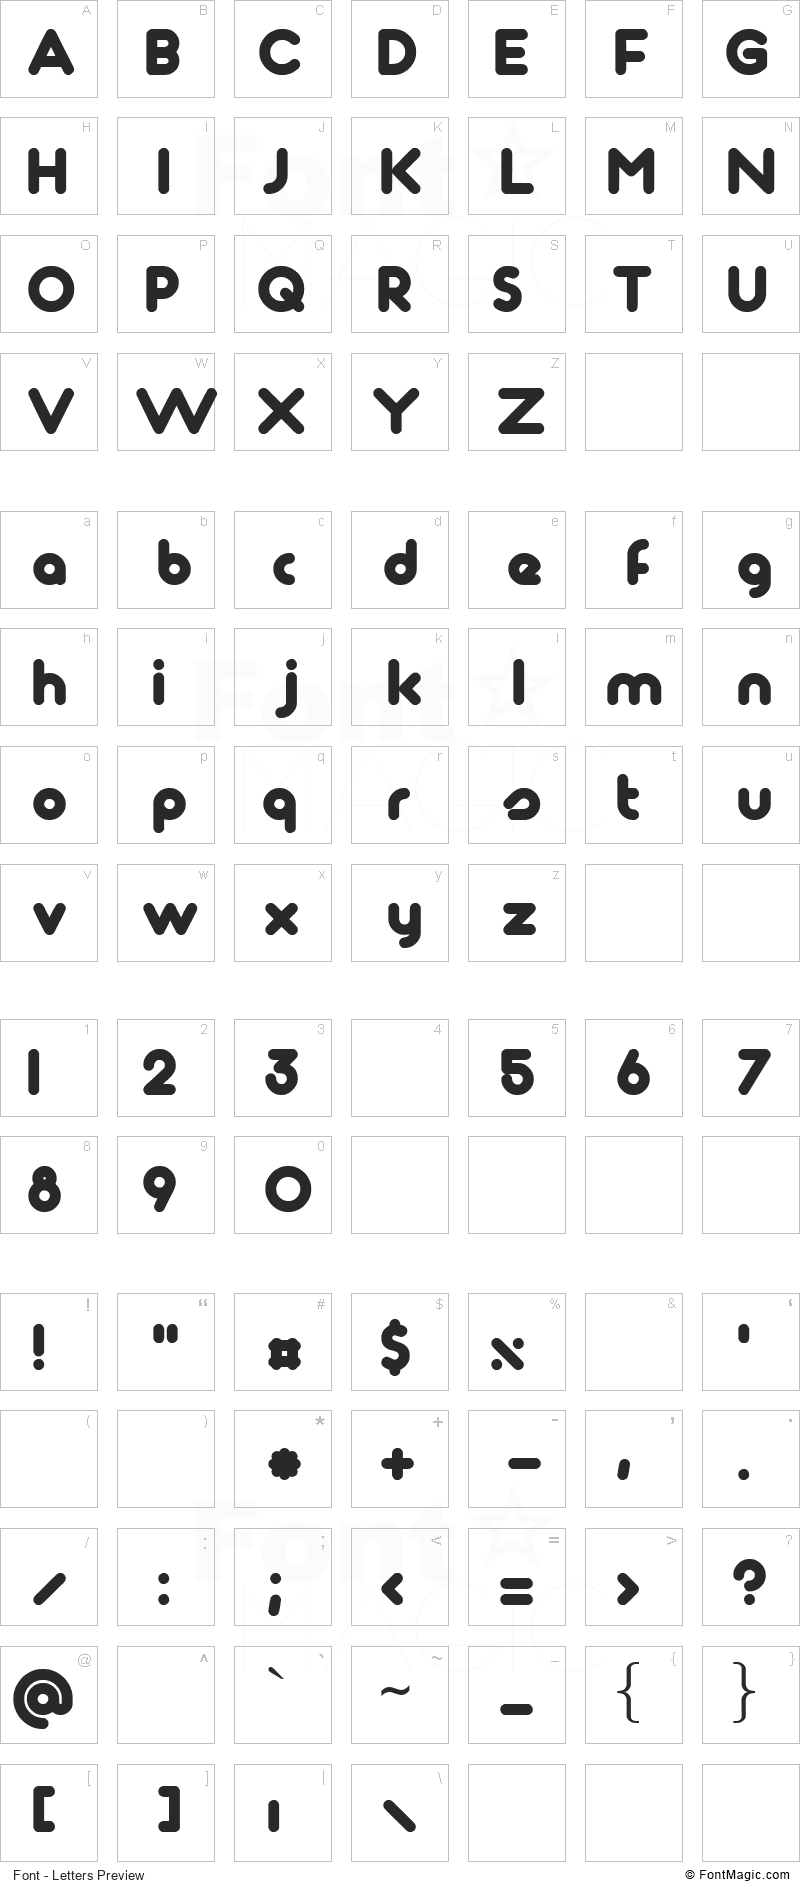 Maagkramp Font - All Latters Preview Chart